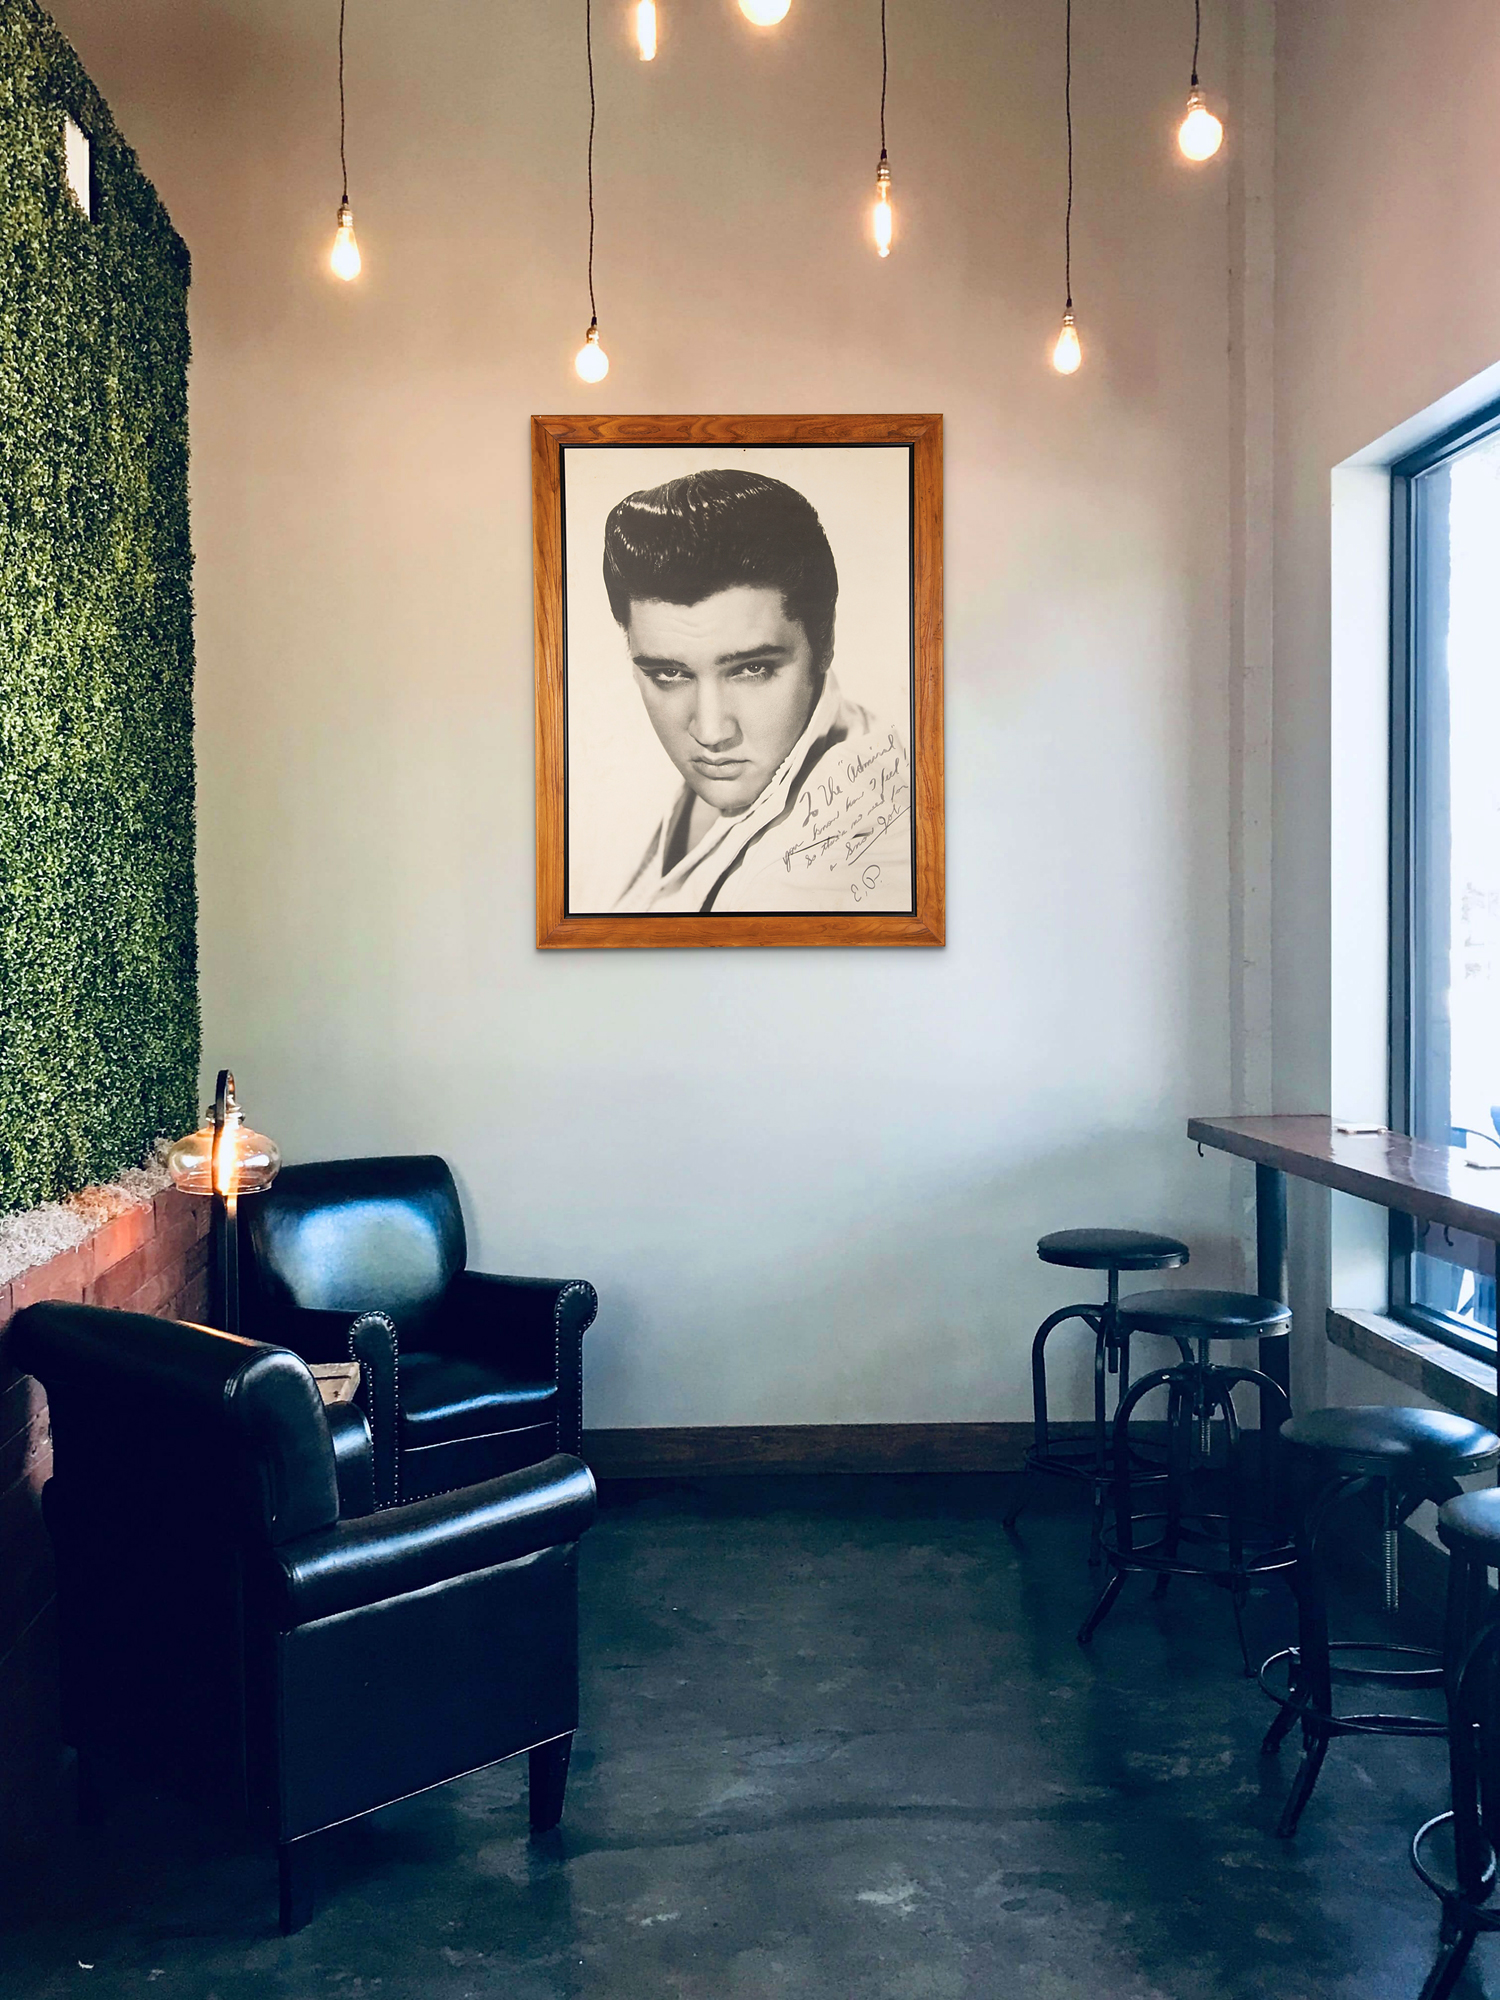 An in situ view of a massive close-up portrait of Elvis Presley, inscribed to Colonel Tom Parker, est. $15,000-$20,000